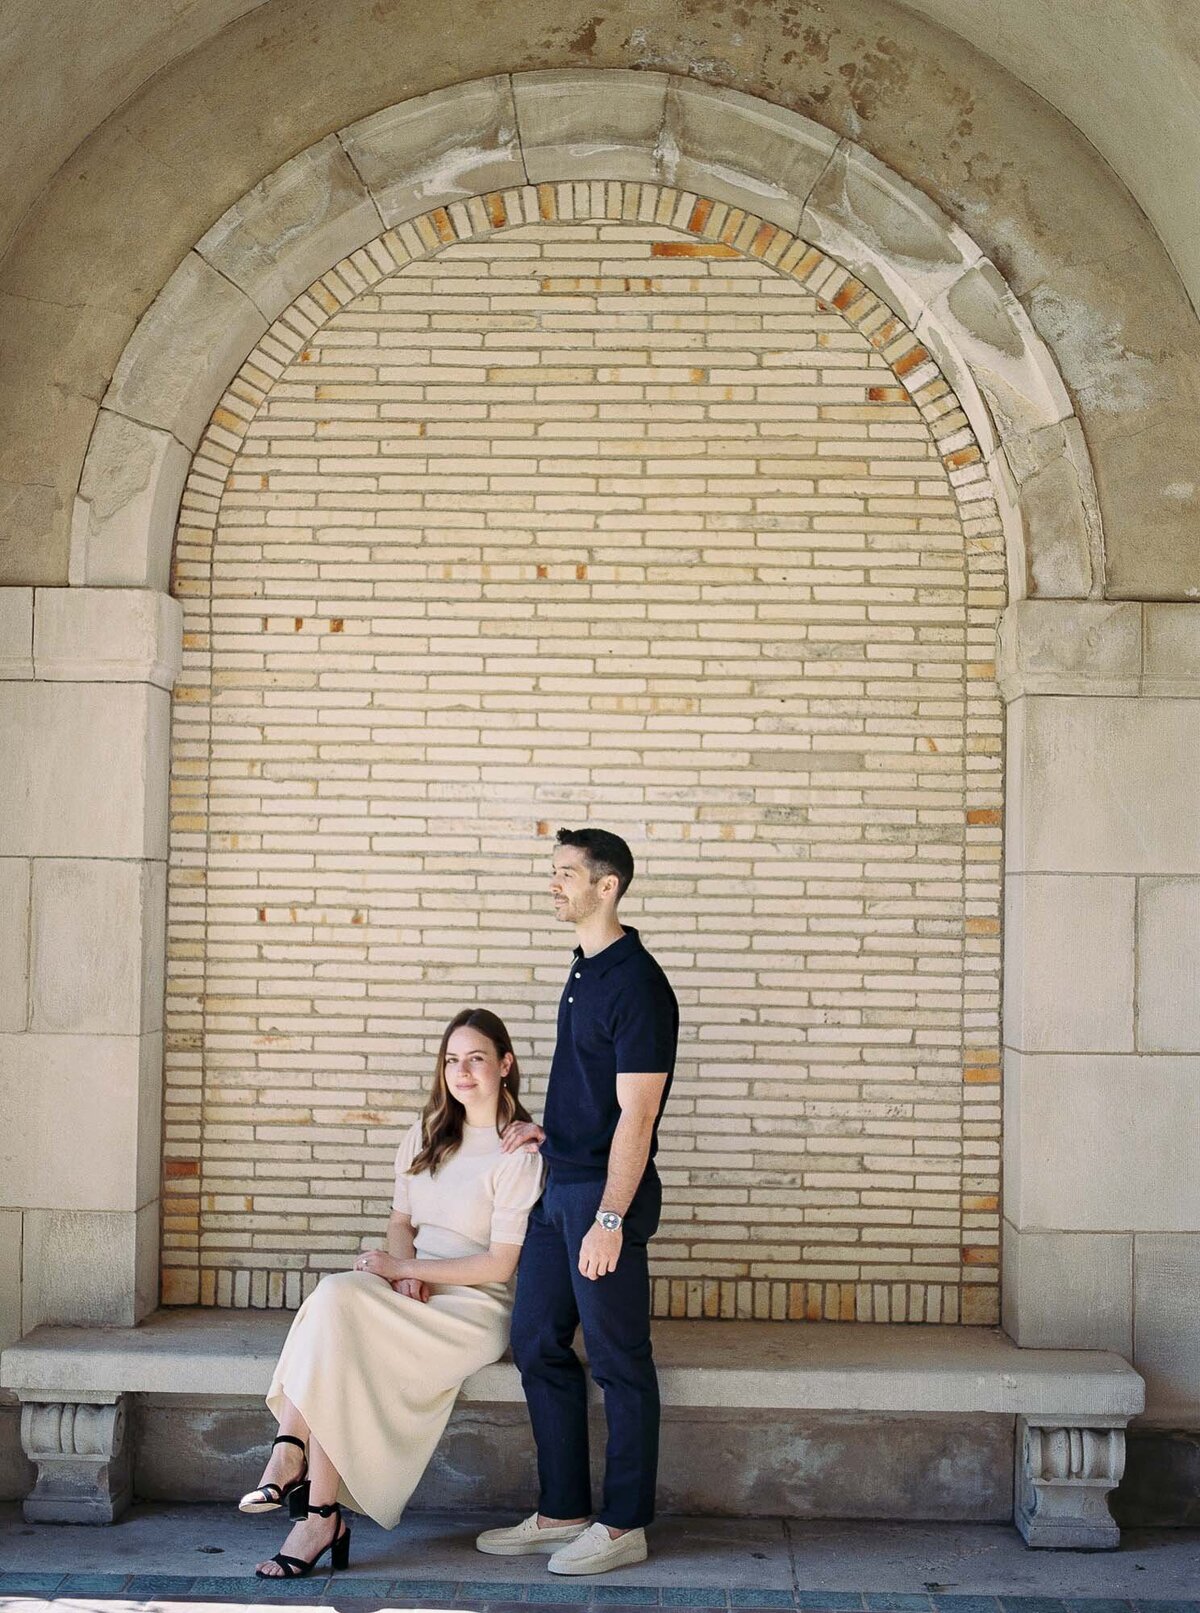 Ali-Reed-Photography-Alexandra-Elise-Photography-Film-George-Eastman-Rochester-New-York-Engagement-Photographer-044